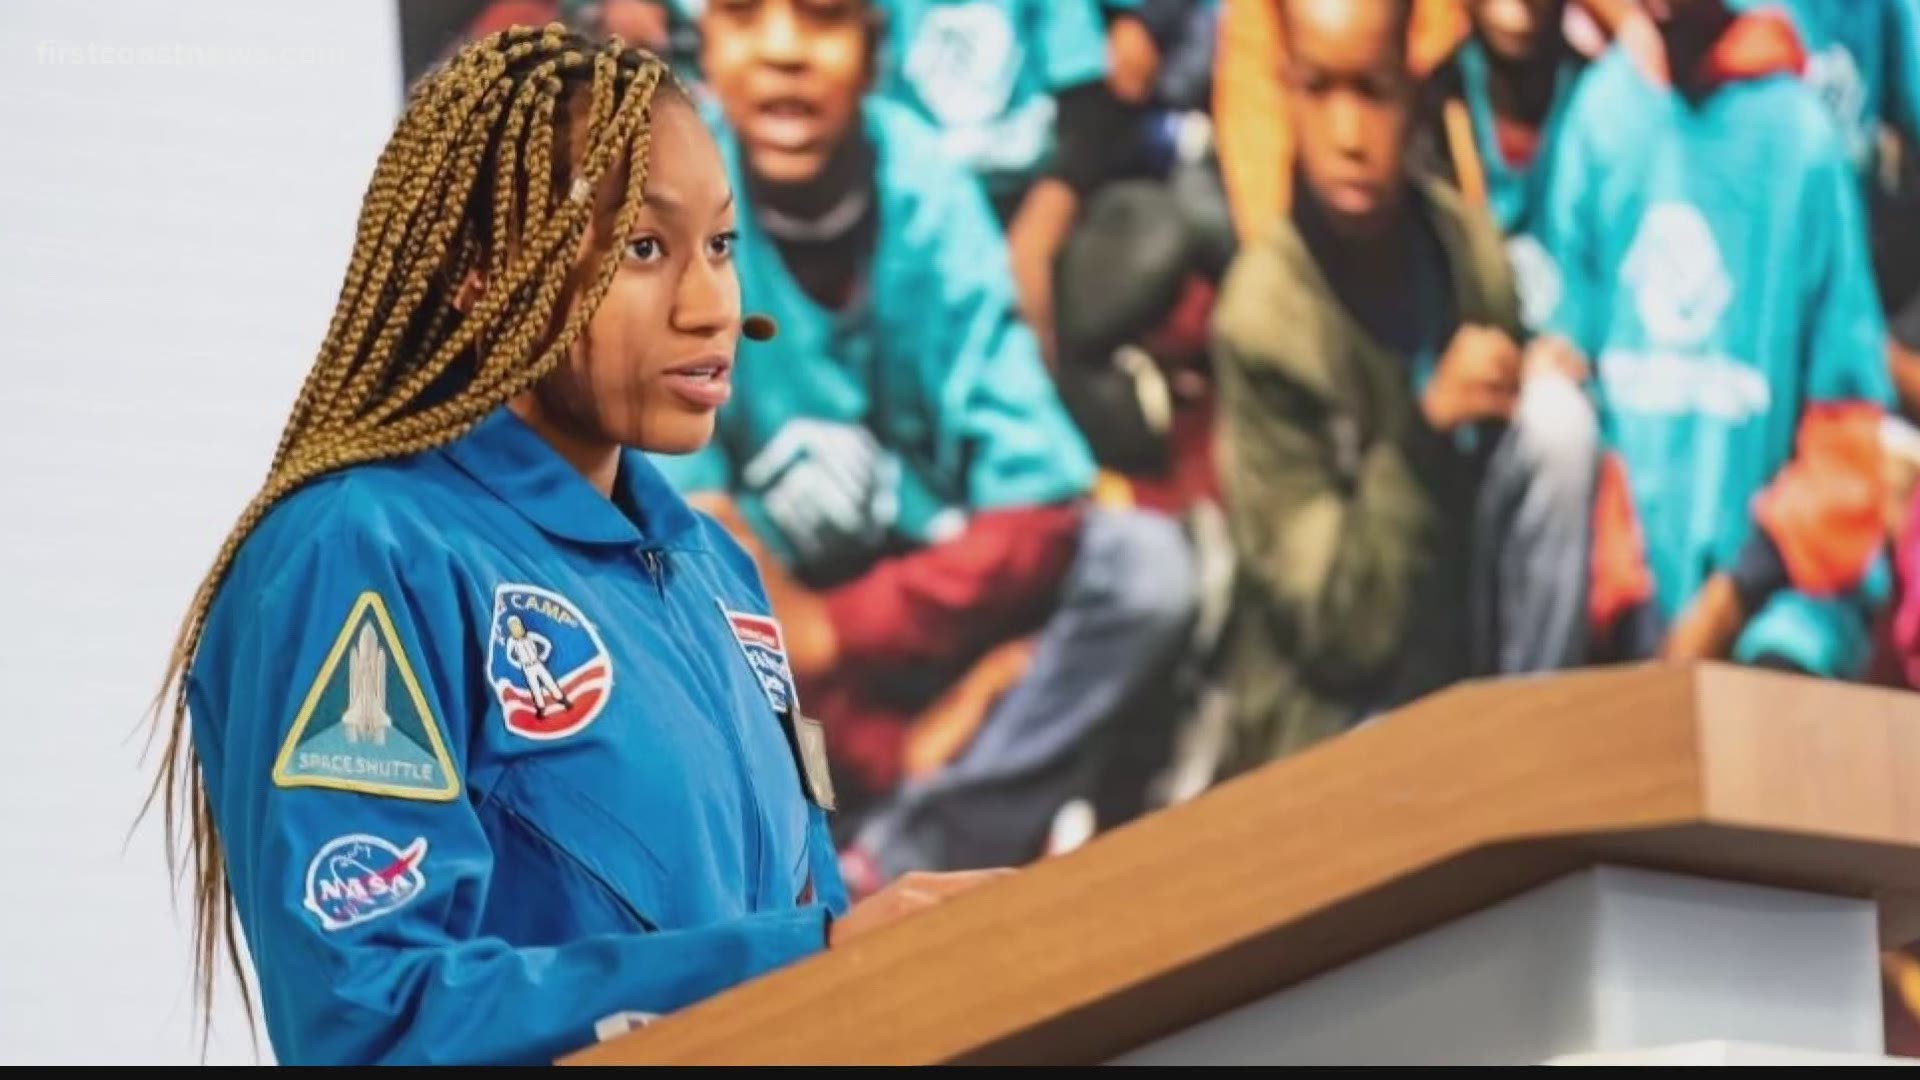 While unsung heroes inspire countless generations to aim higher, a Jacksonville teen is reaching beyond the stars to pave the way for young girls of color.